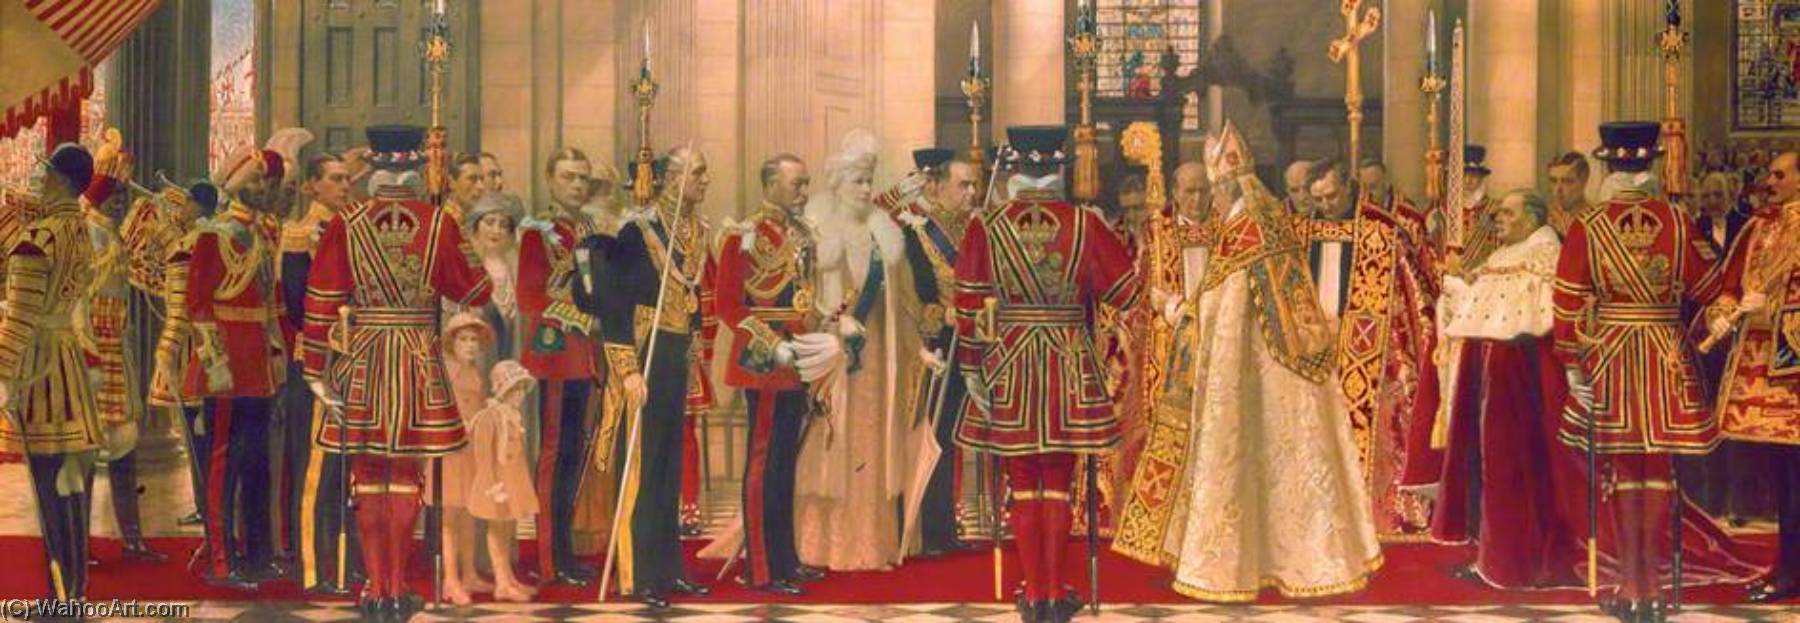 Order Artwork Replica Reception of King George V and Queen Mary at the West Door of St Paul`s Cathedral, London, Jubilee Day, 6 May 1935 by Frank O Salisbury (Inspired By) (1874-1962, United Kingdom) | ArtsDot.com